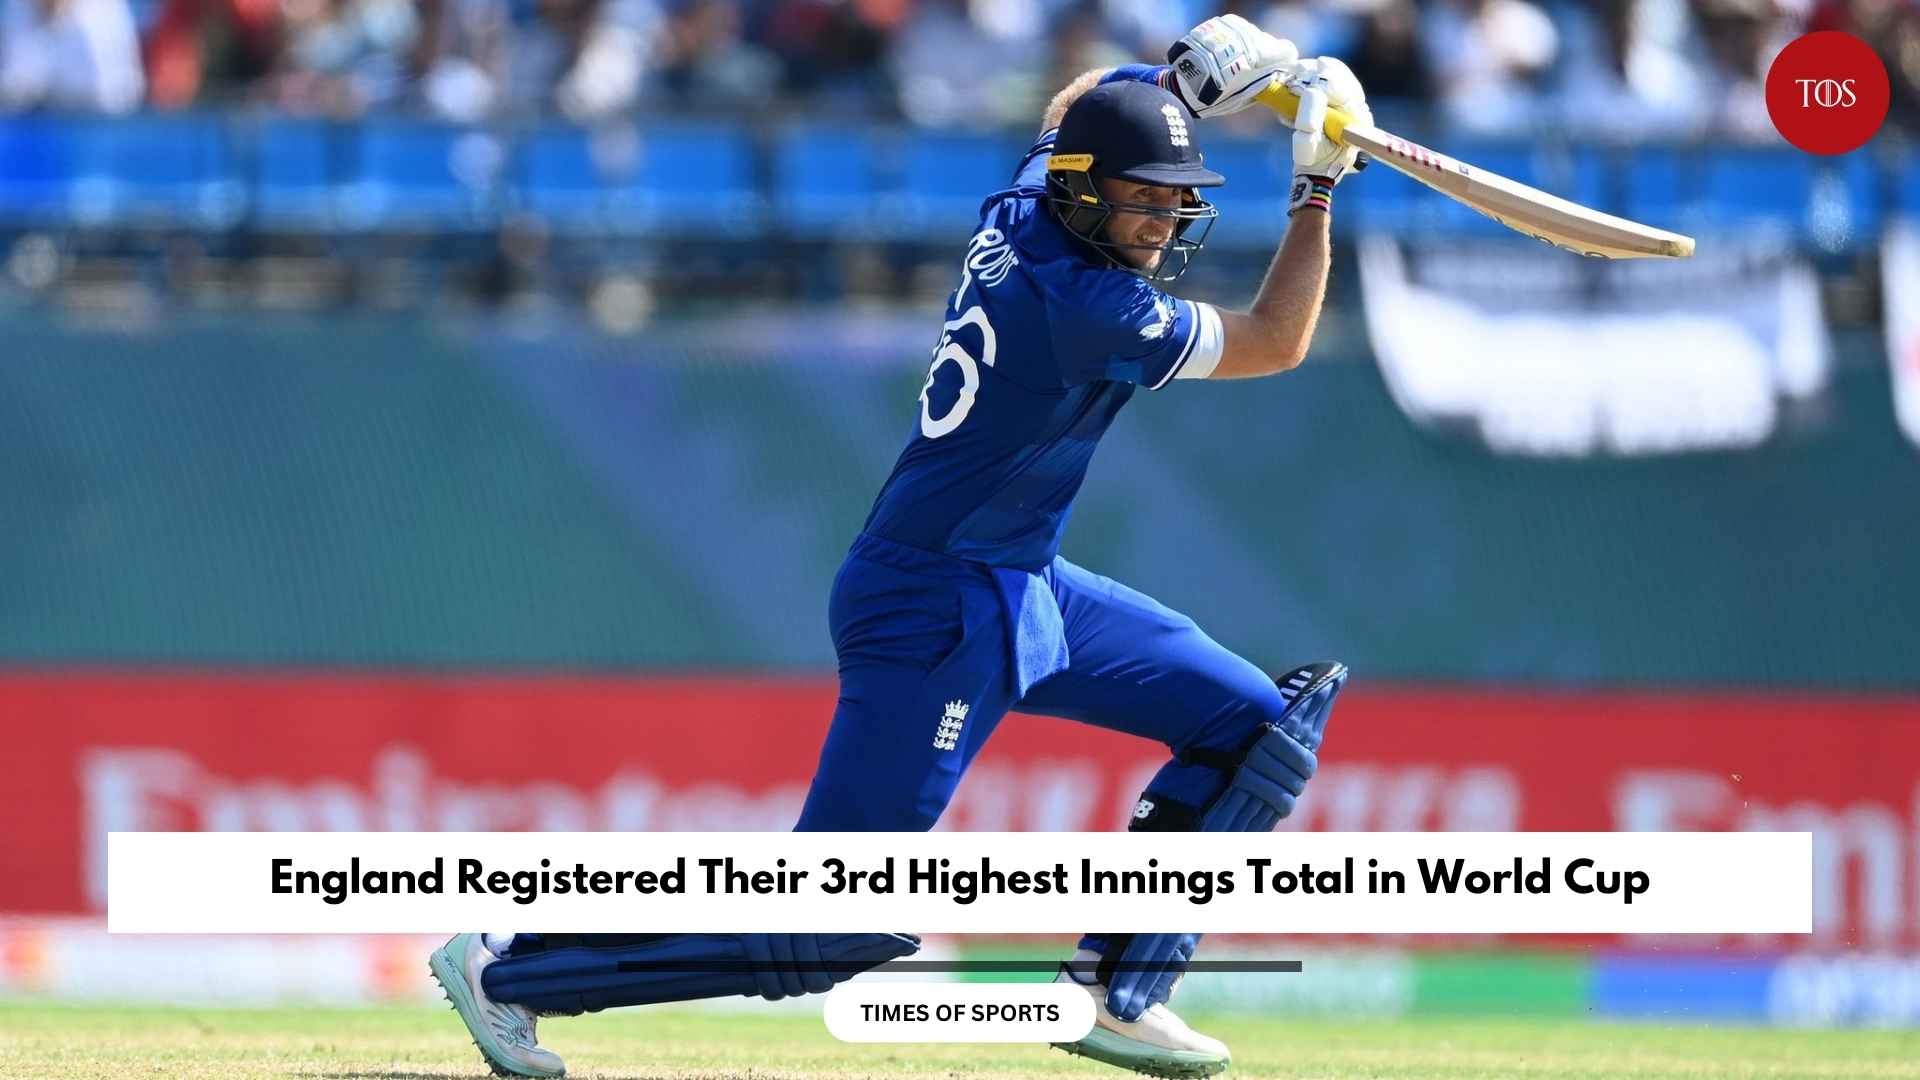 Highest Innings Total for England in World Cup